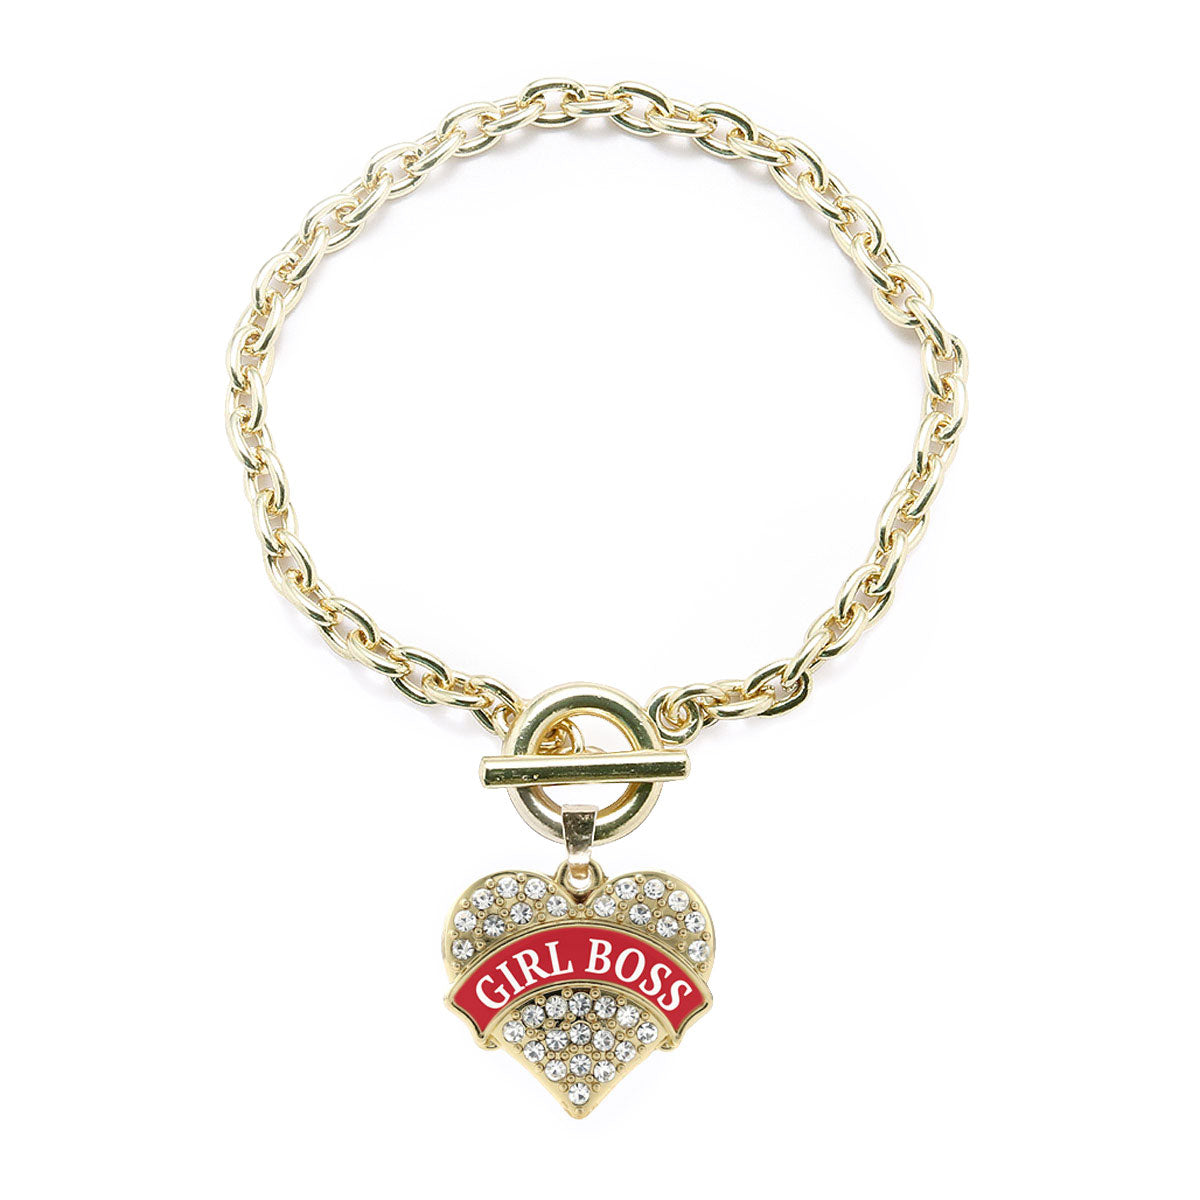 Gold Red Girl Boss Pave Heart Charm Toggle Bracelet